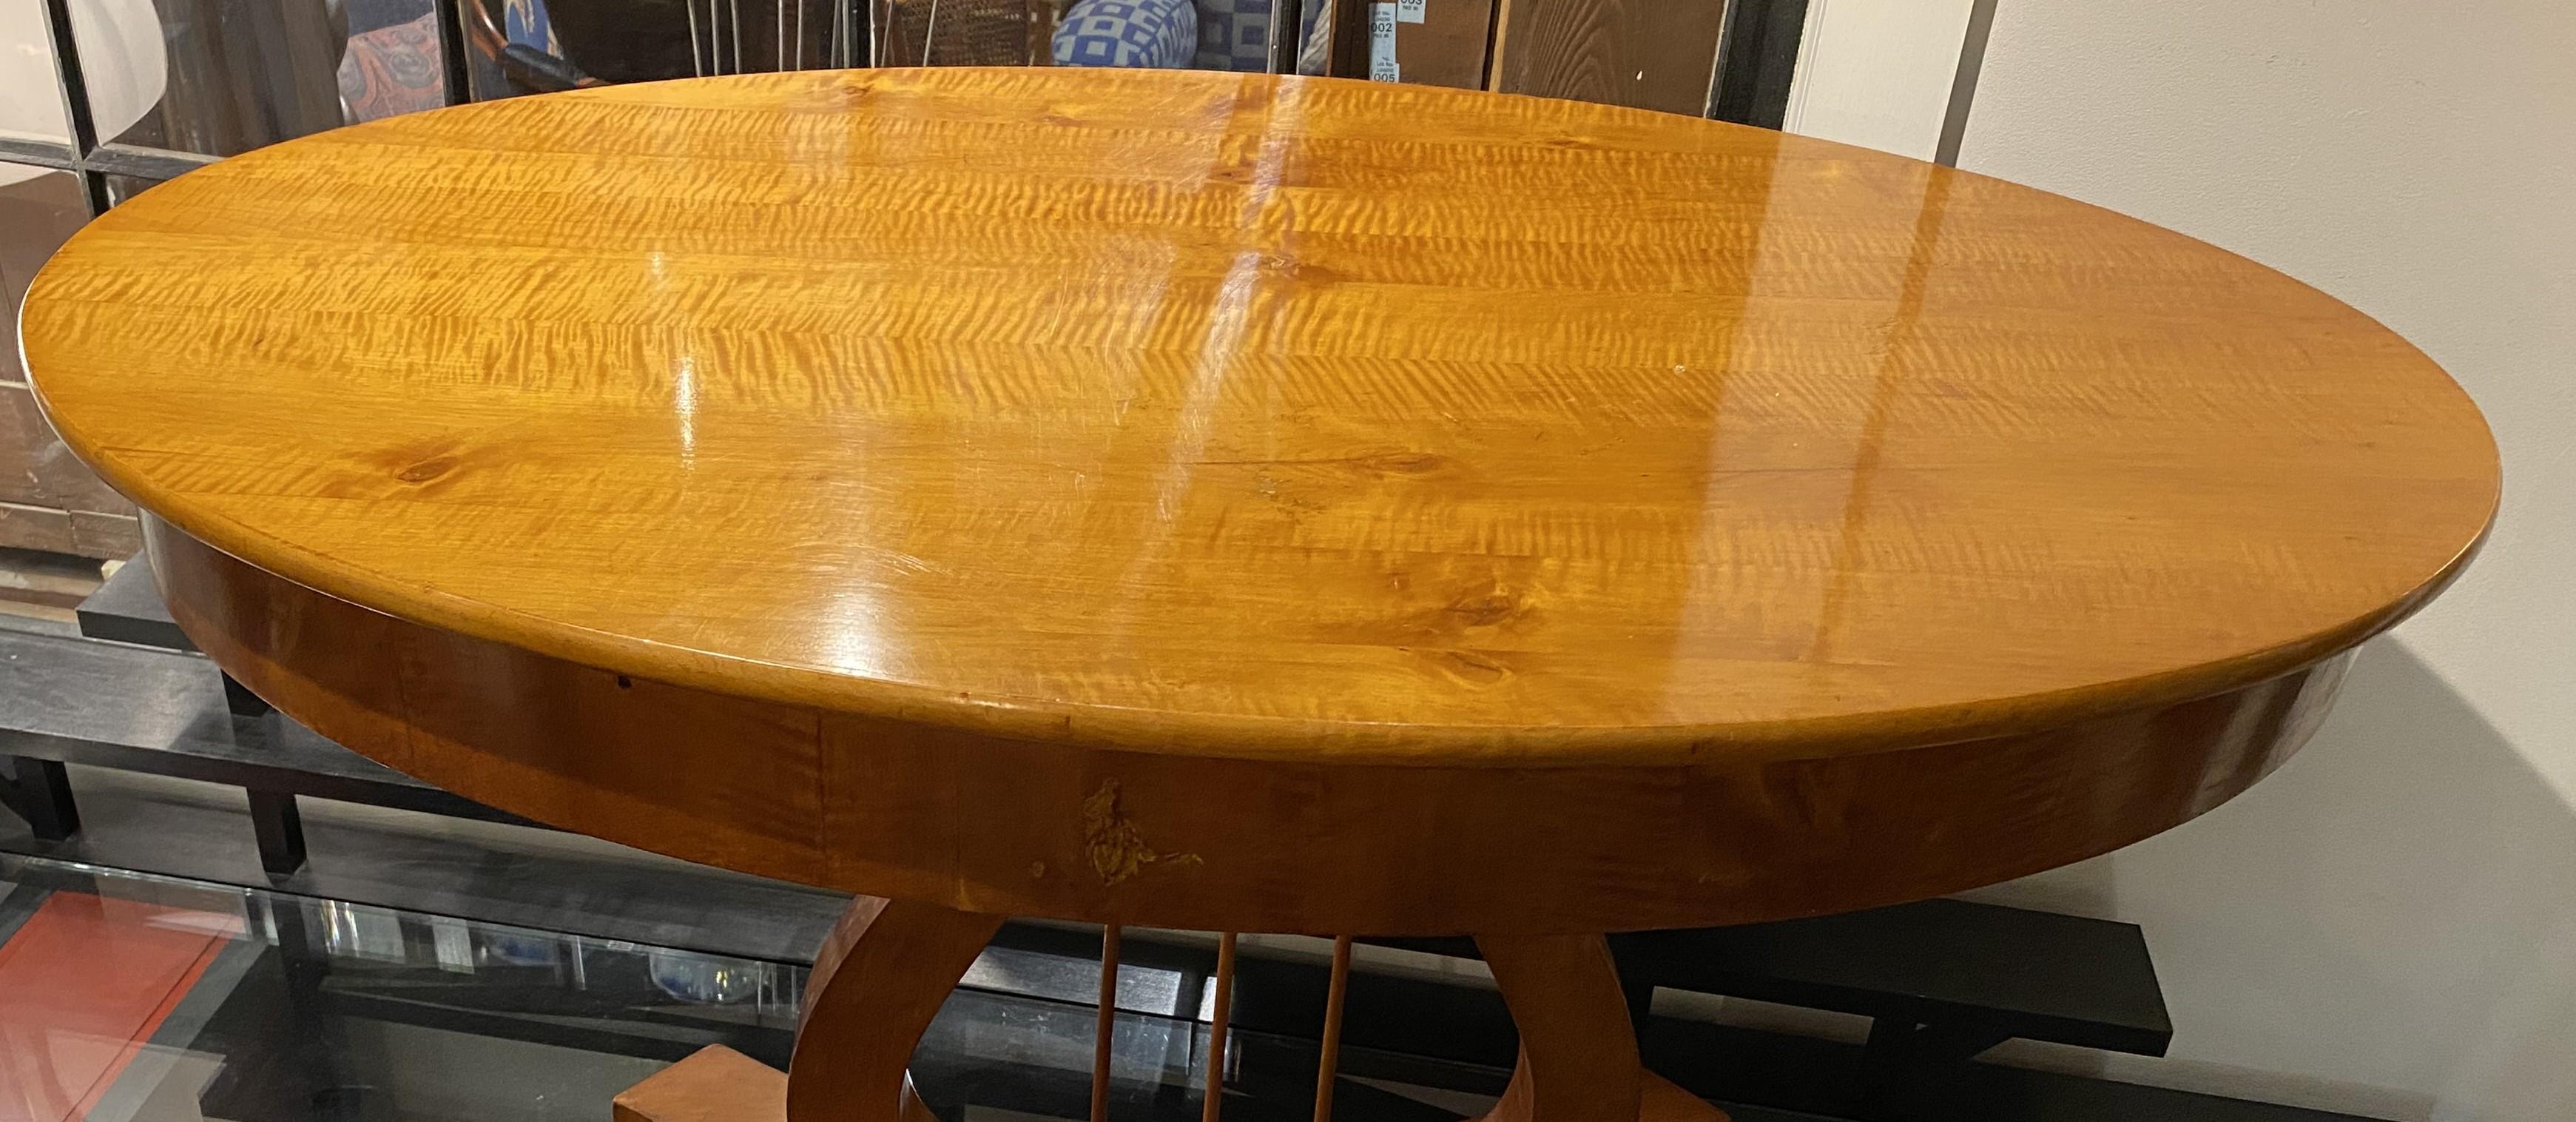 A fine Biedermeier or Classical style oval center table in curly maple with scroll carved lyre form pedestal on a shaped base with four outstretched feet. Dates to the 19th century in very good condition, with great tiger maple wood grain, minimal